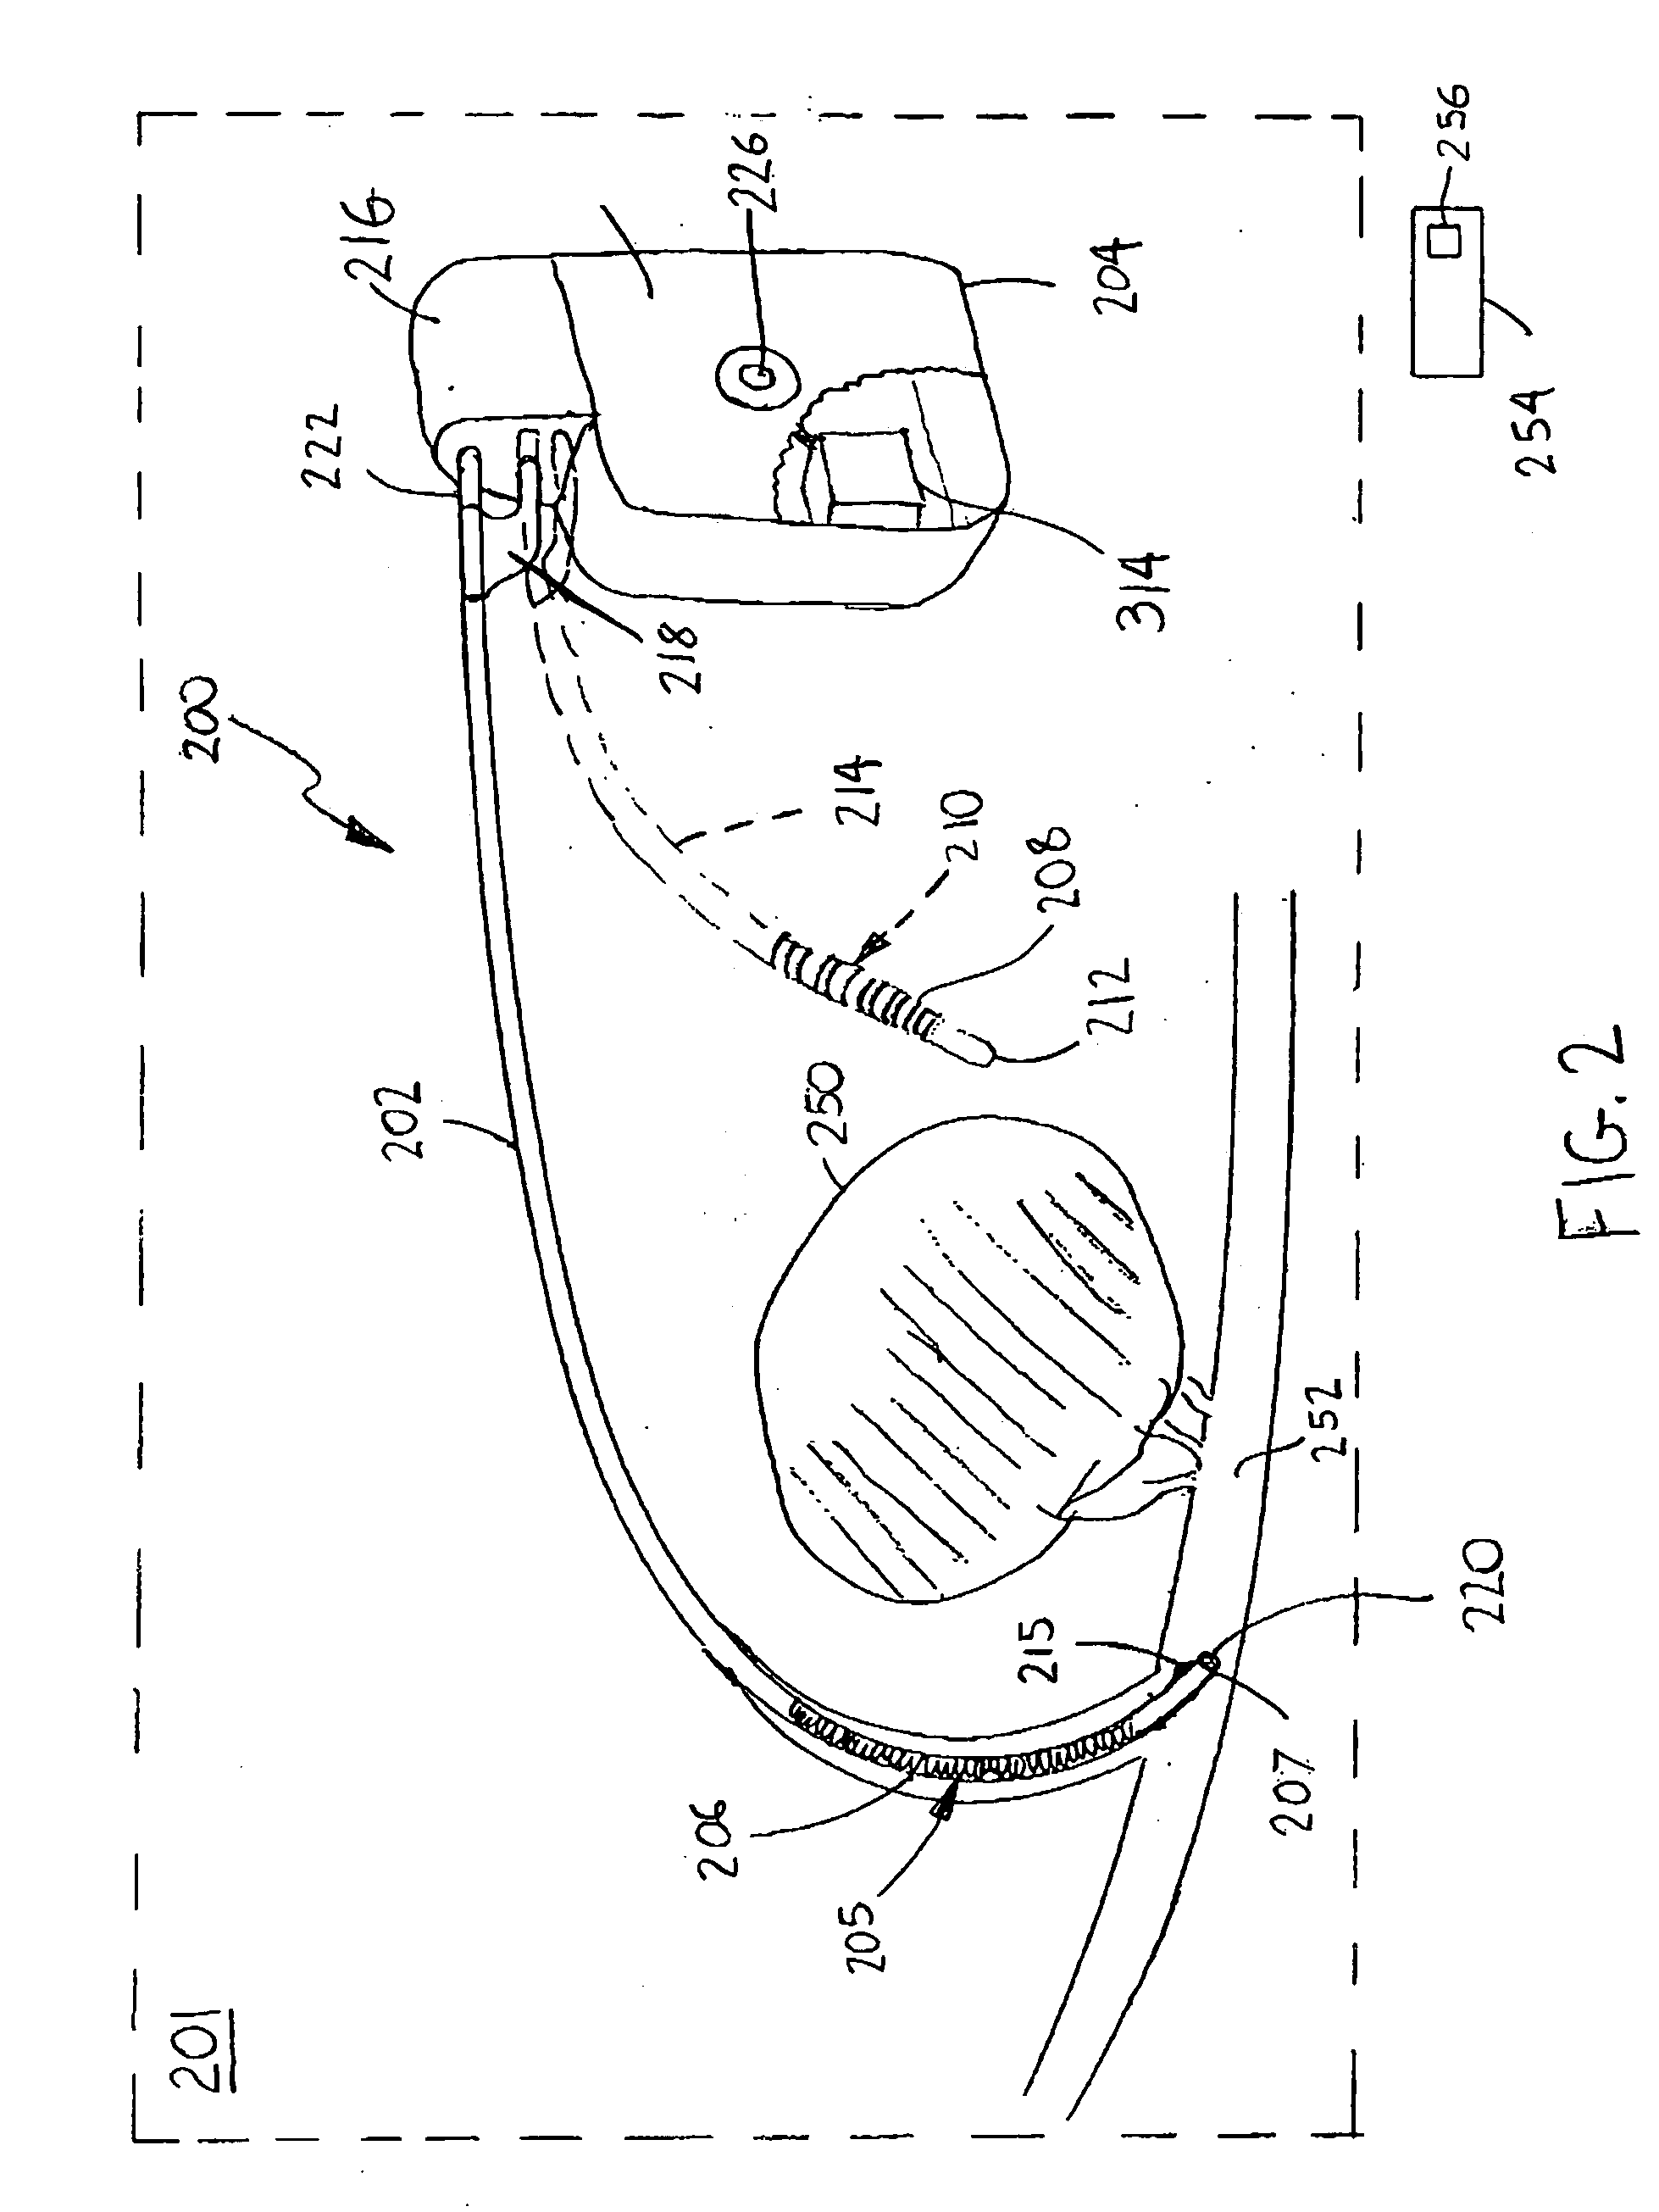 Implantable electroporation therapy device and method for using same